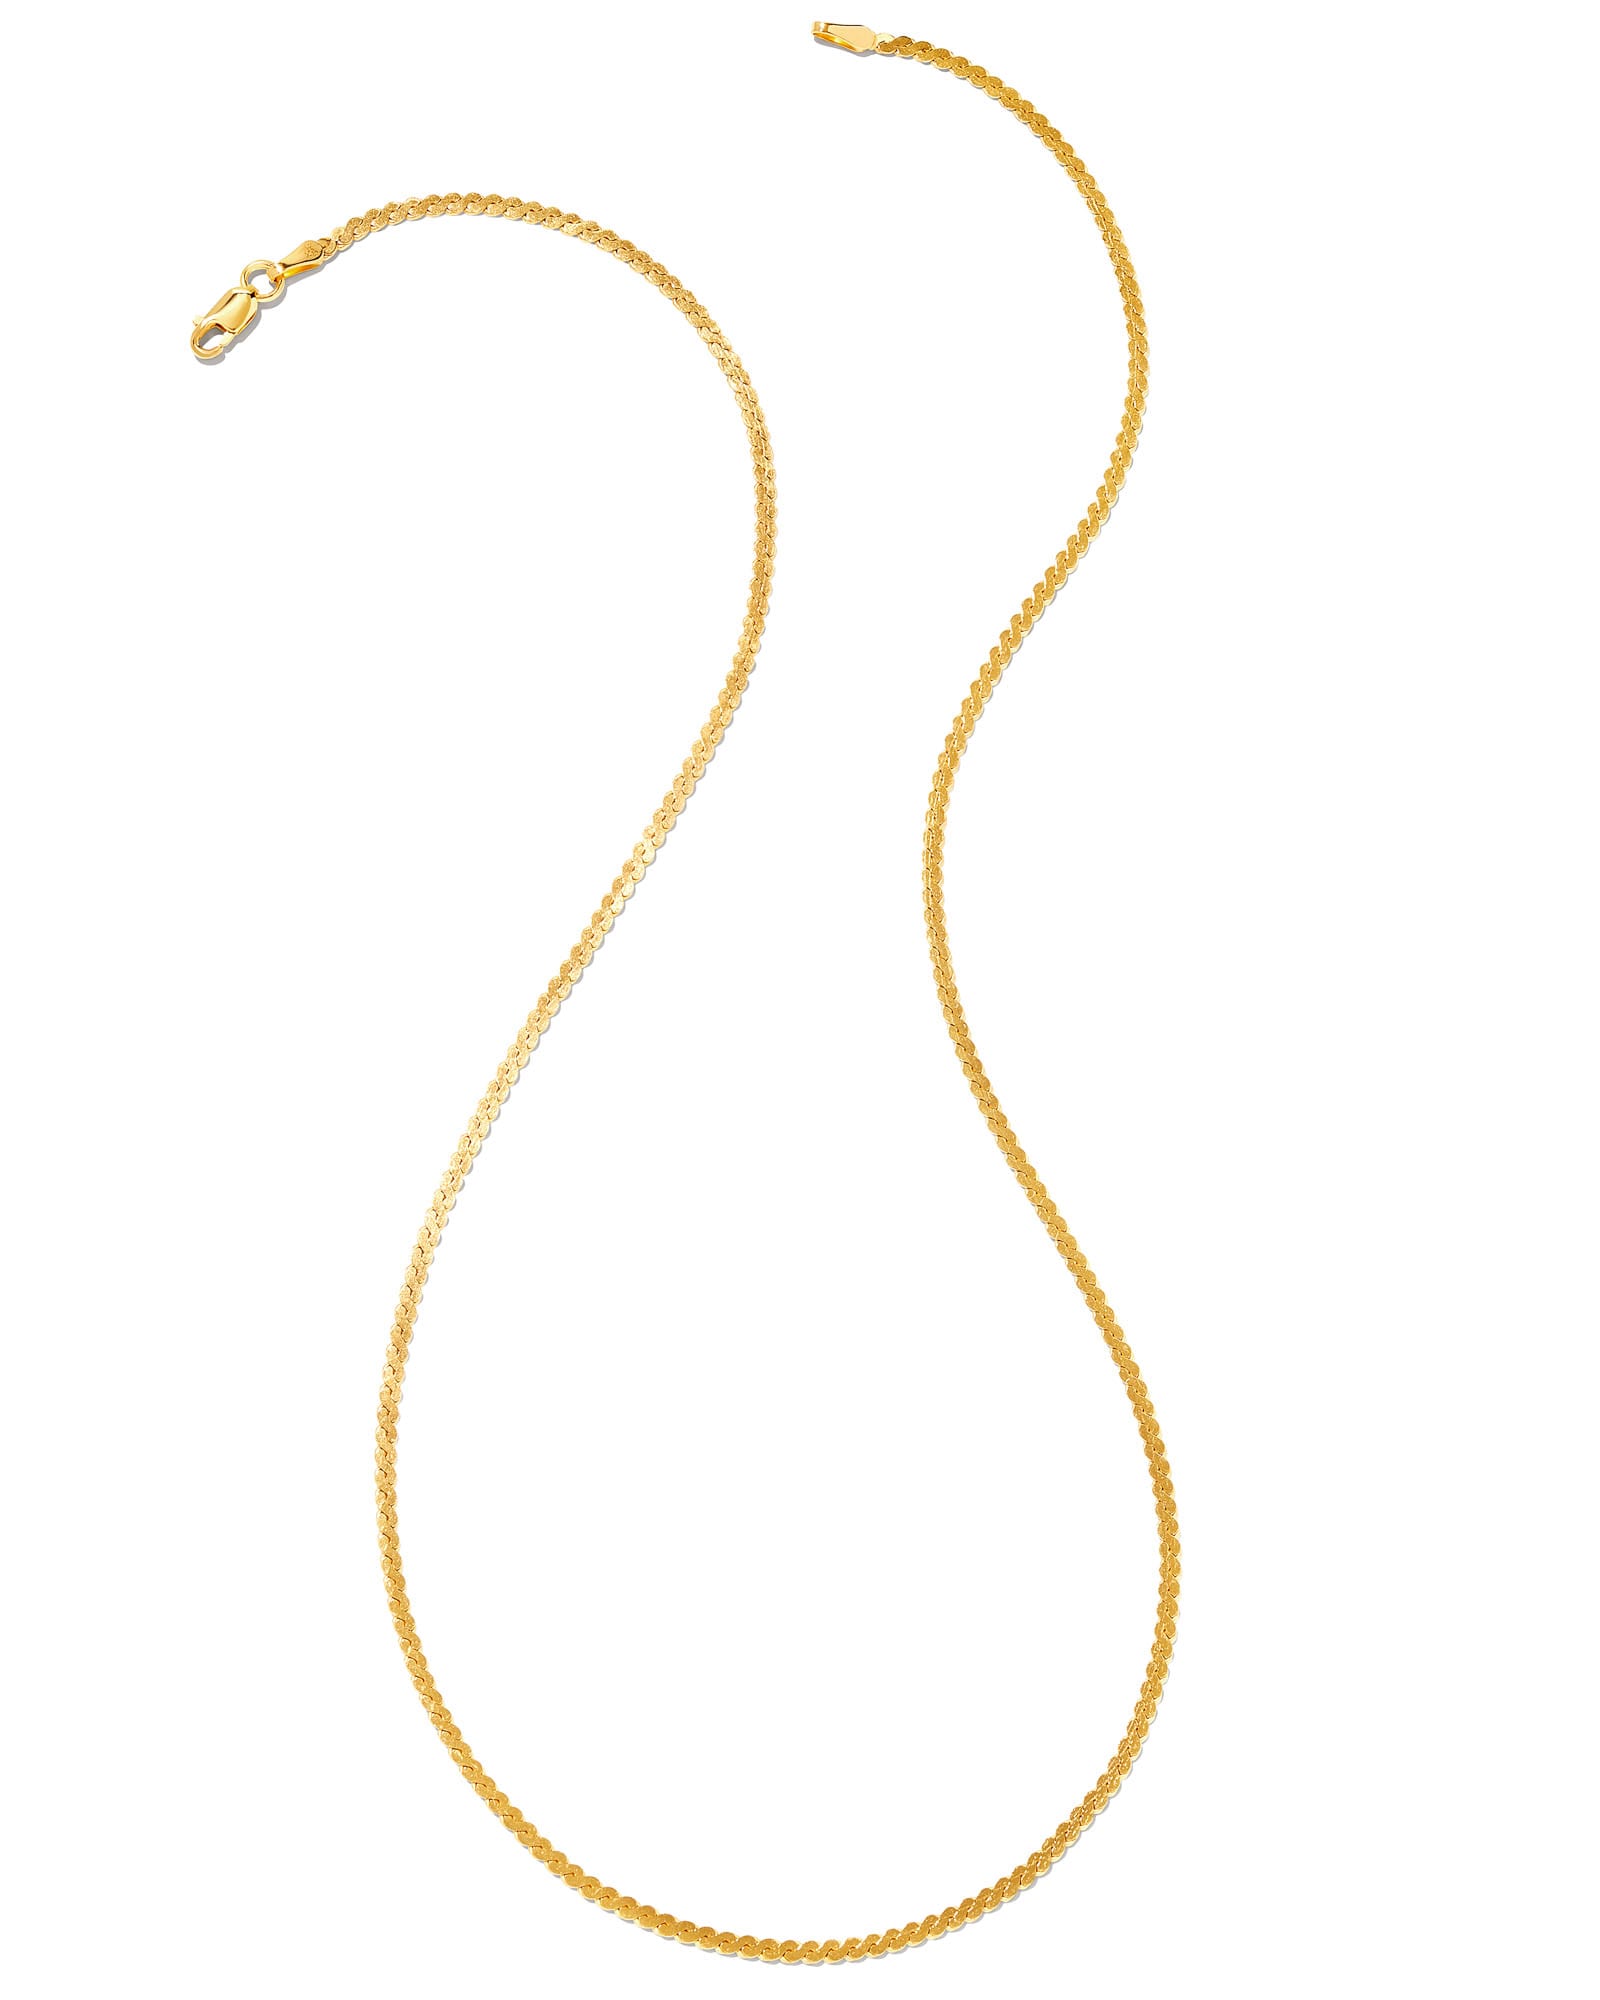 Kendra Scott Small Serpentine Chain Necklace in 18k Gold Vermeil | Sterling Silver